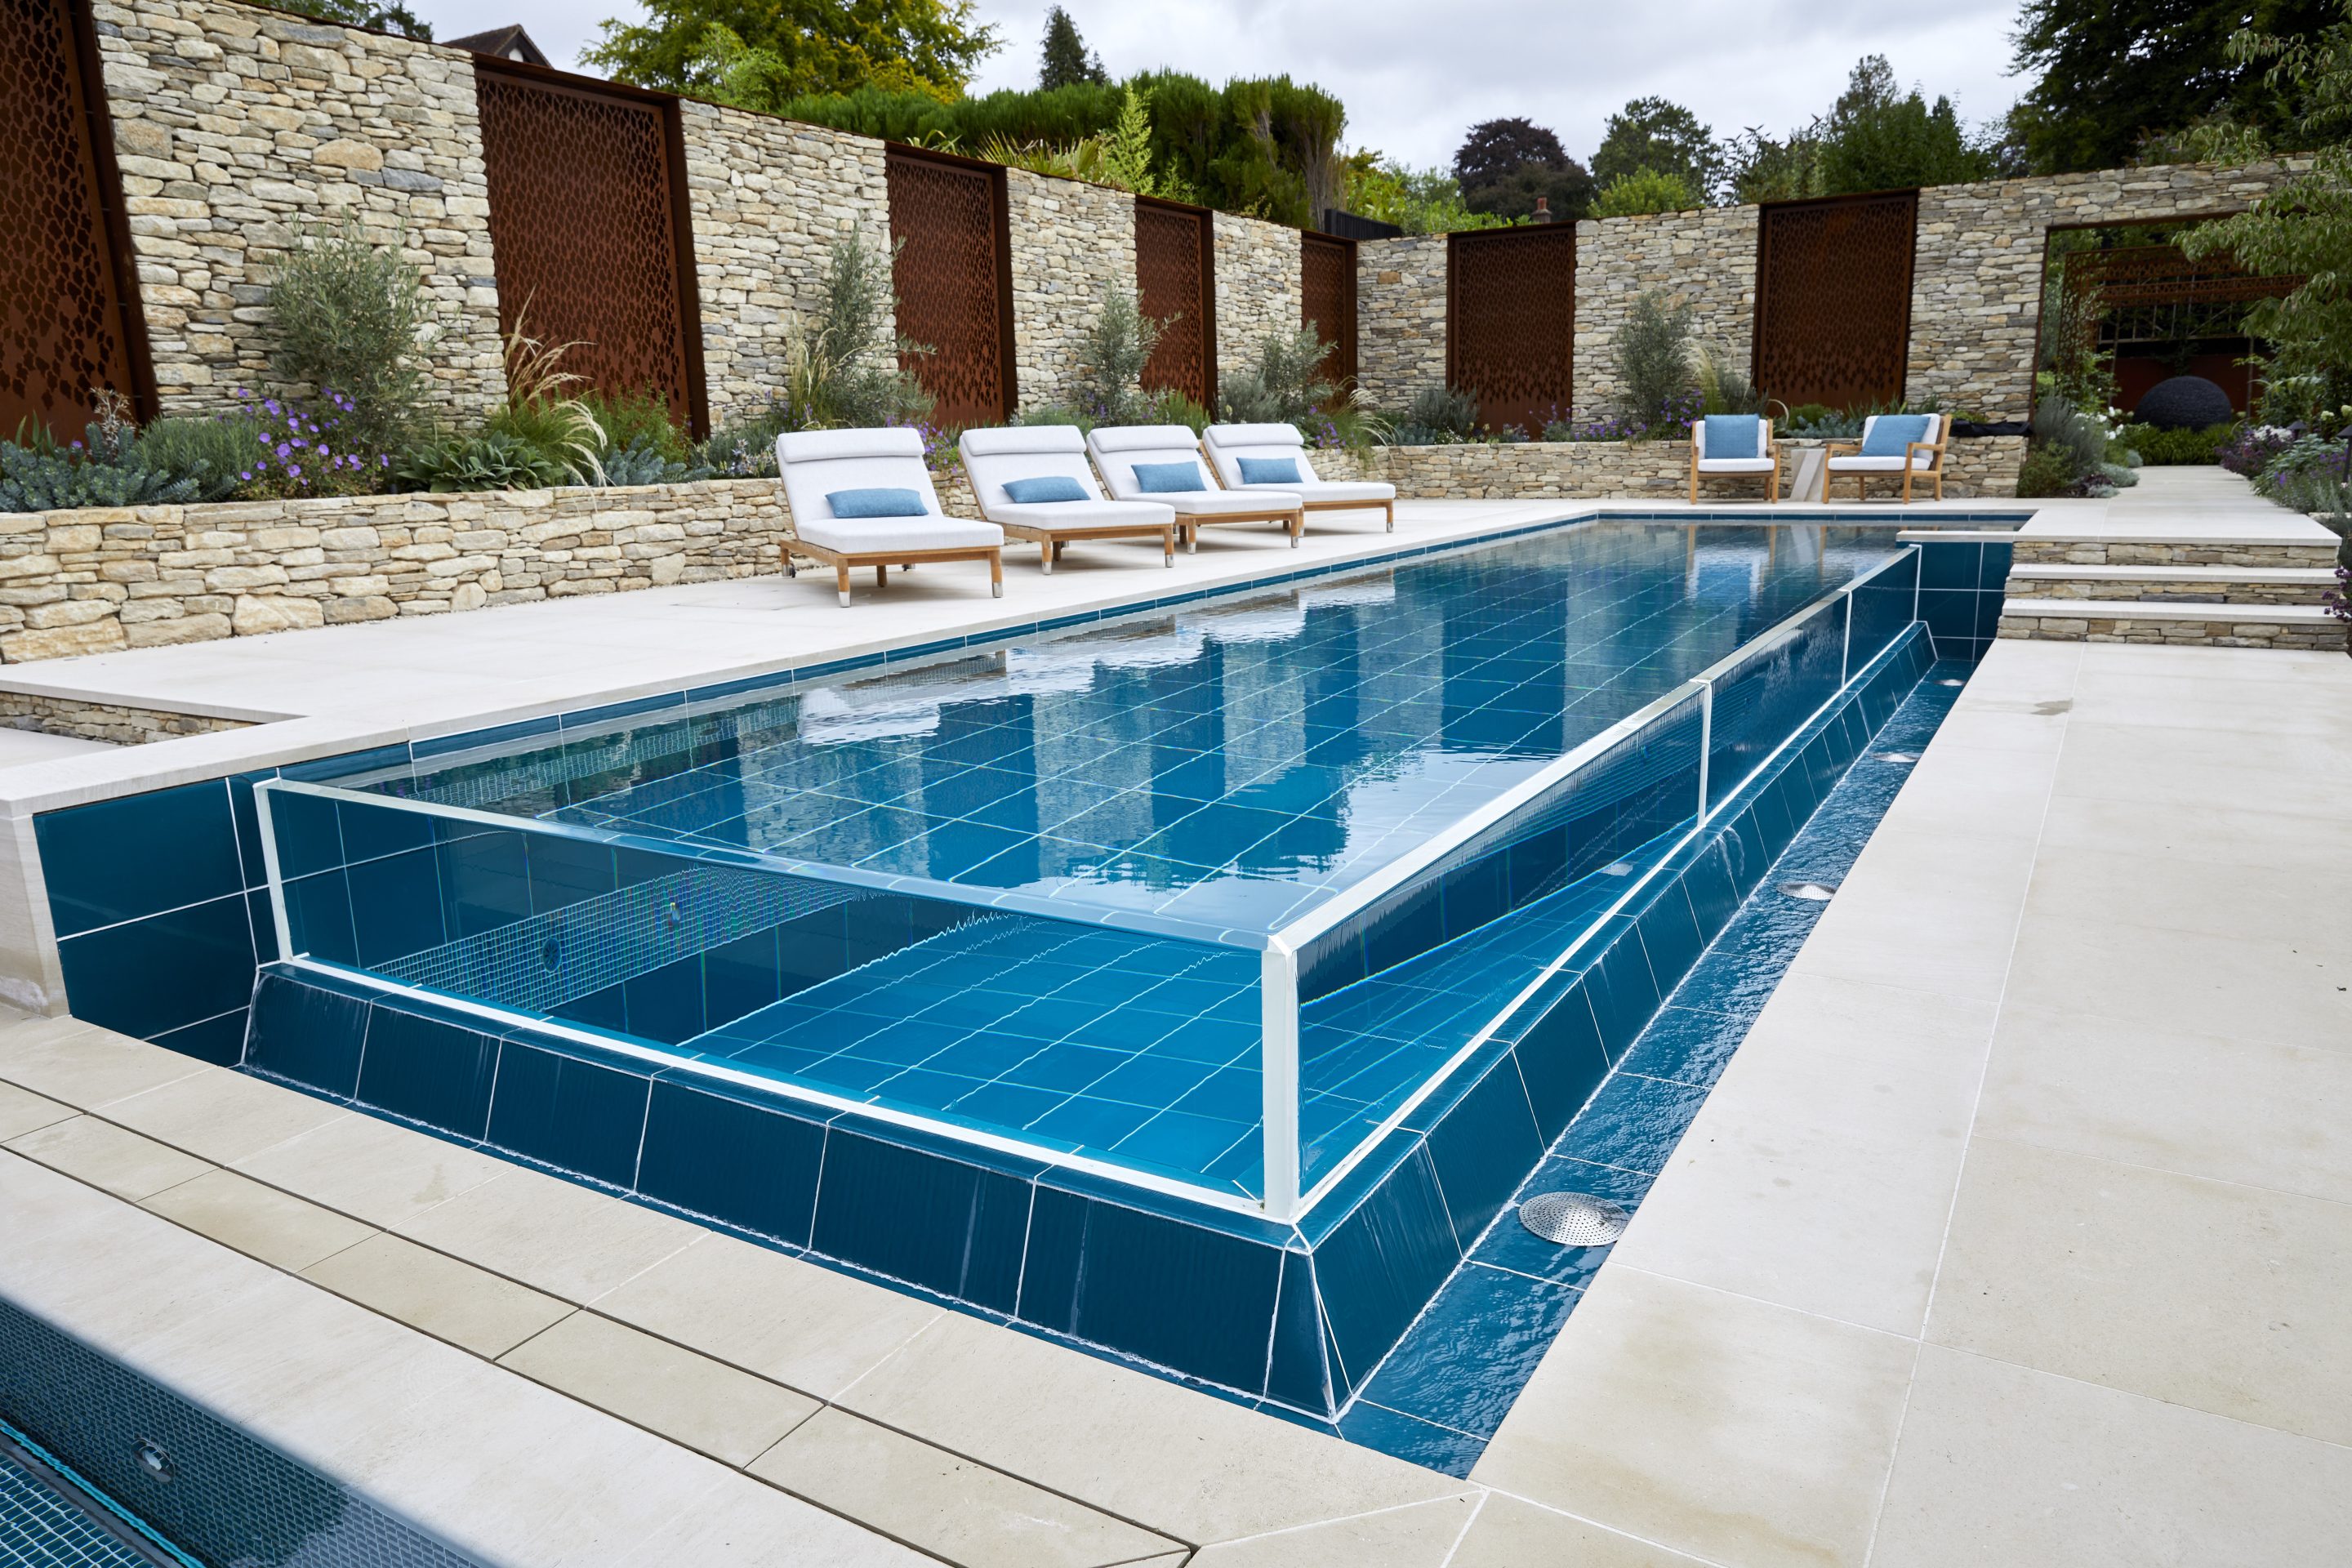 A distinctive outdoor infinity pool design from a project in Surrey. Pool is crystal clear blue, face on at an angle leaning to the left with deck chairs to the left and a path with steps to the right.